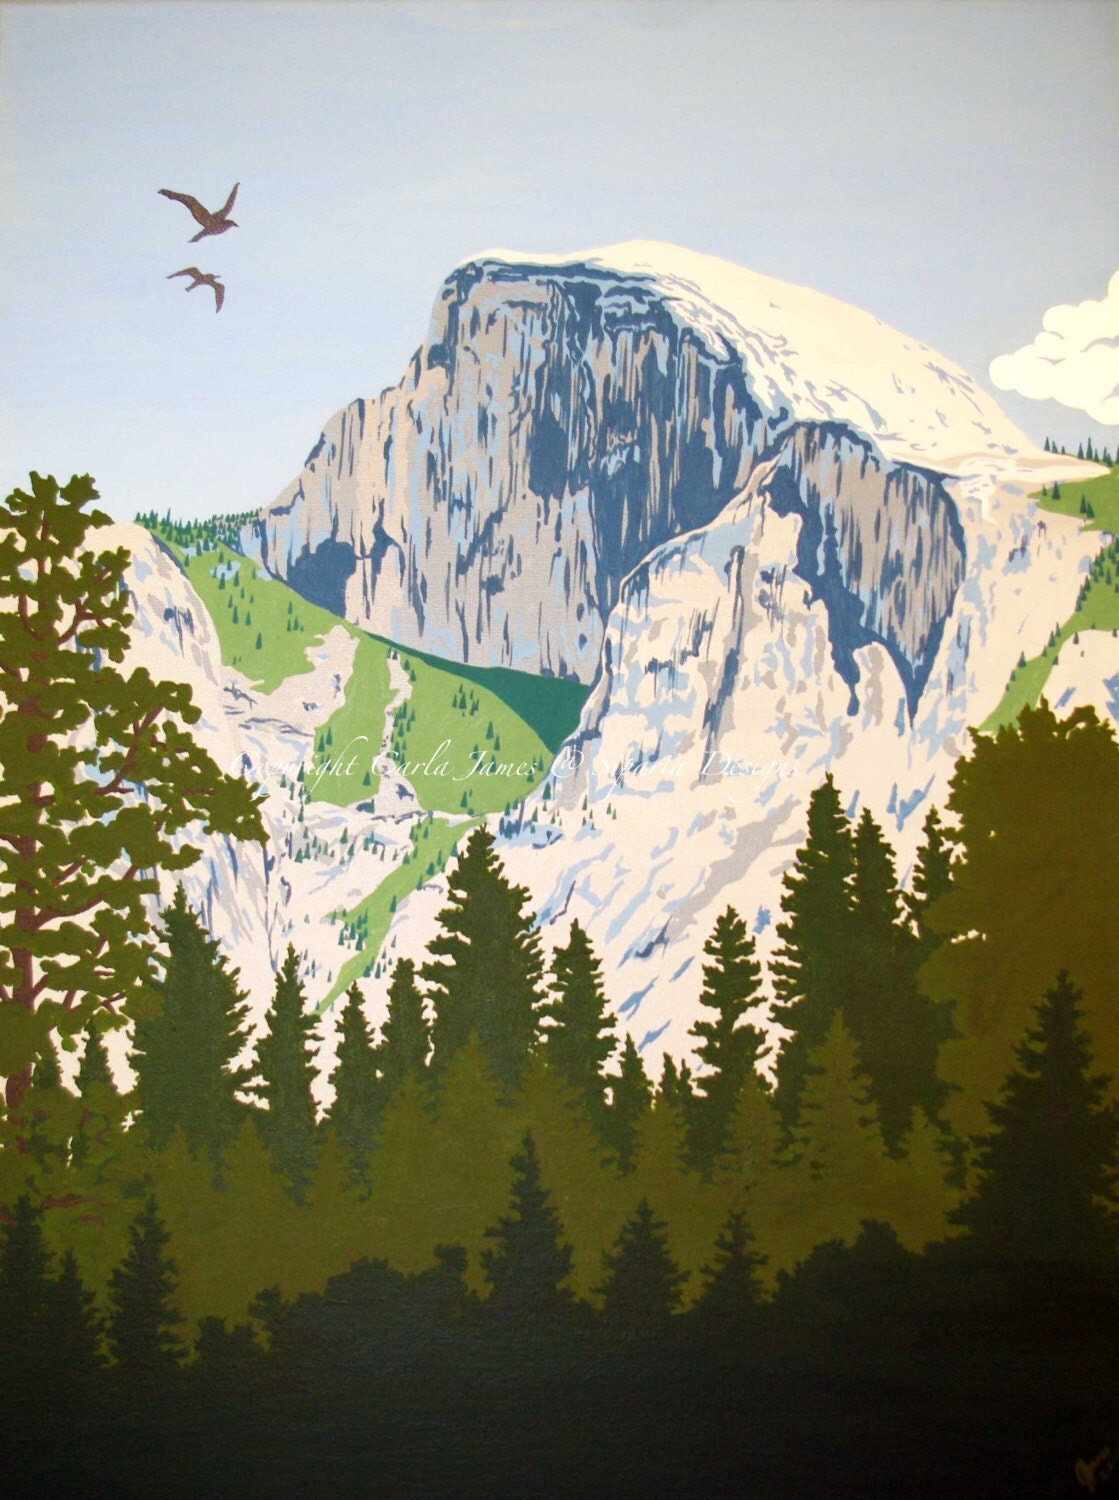 Painting of Half Dome In Yosemite by Siparia on Etsy